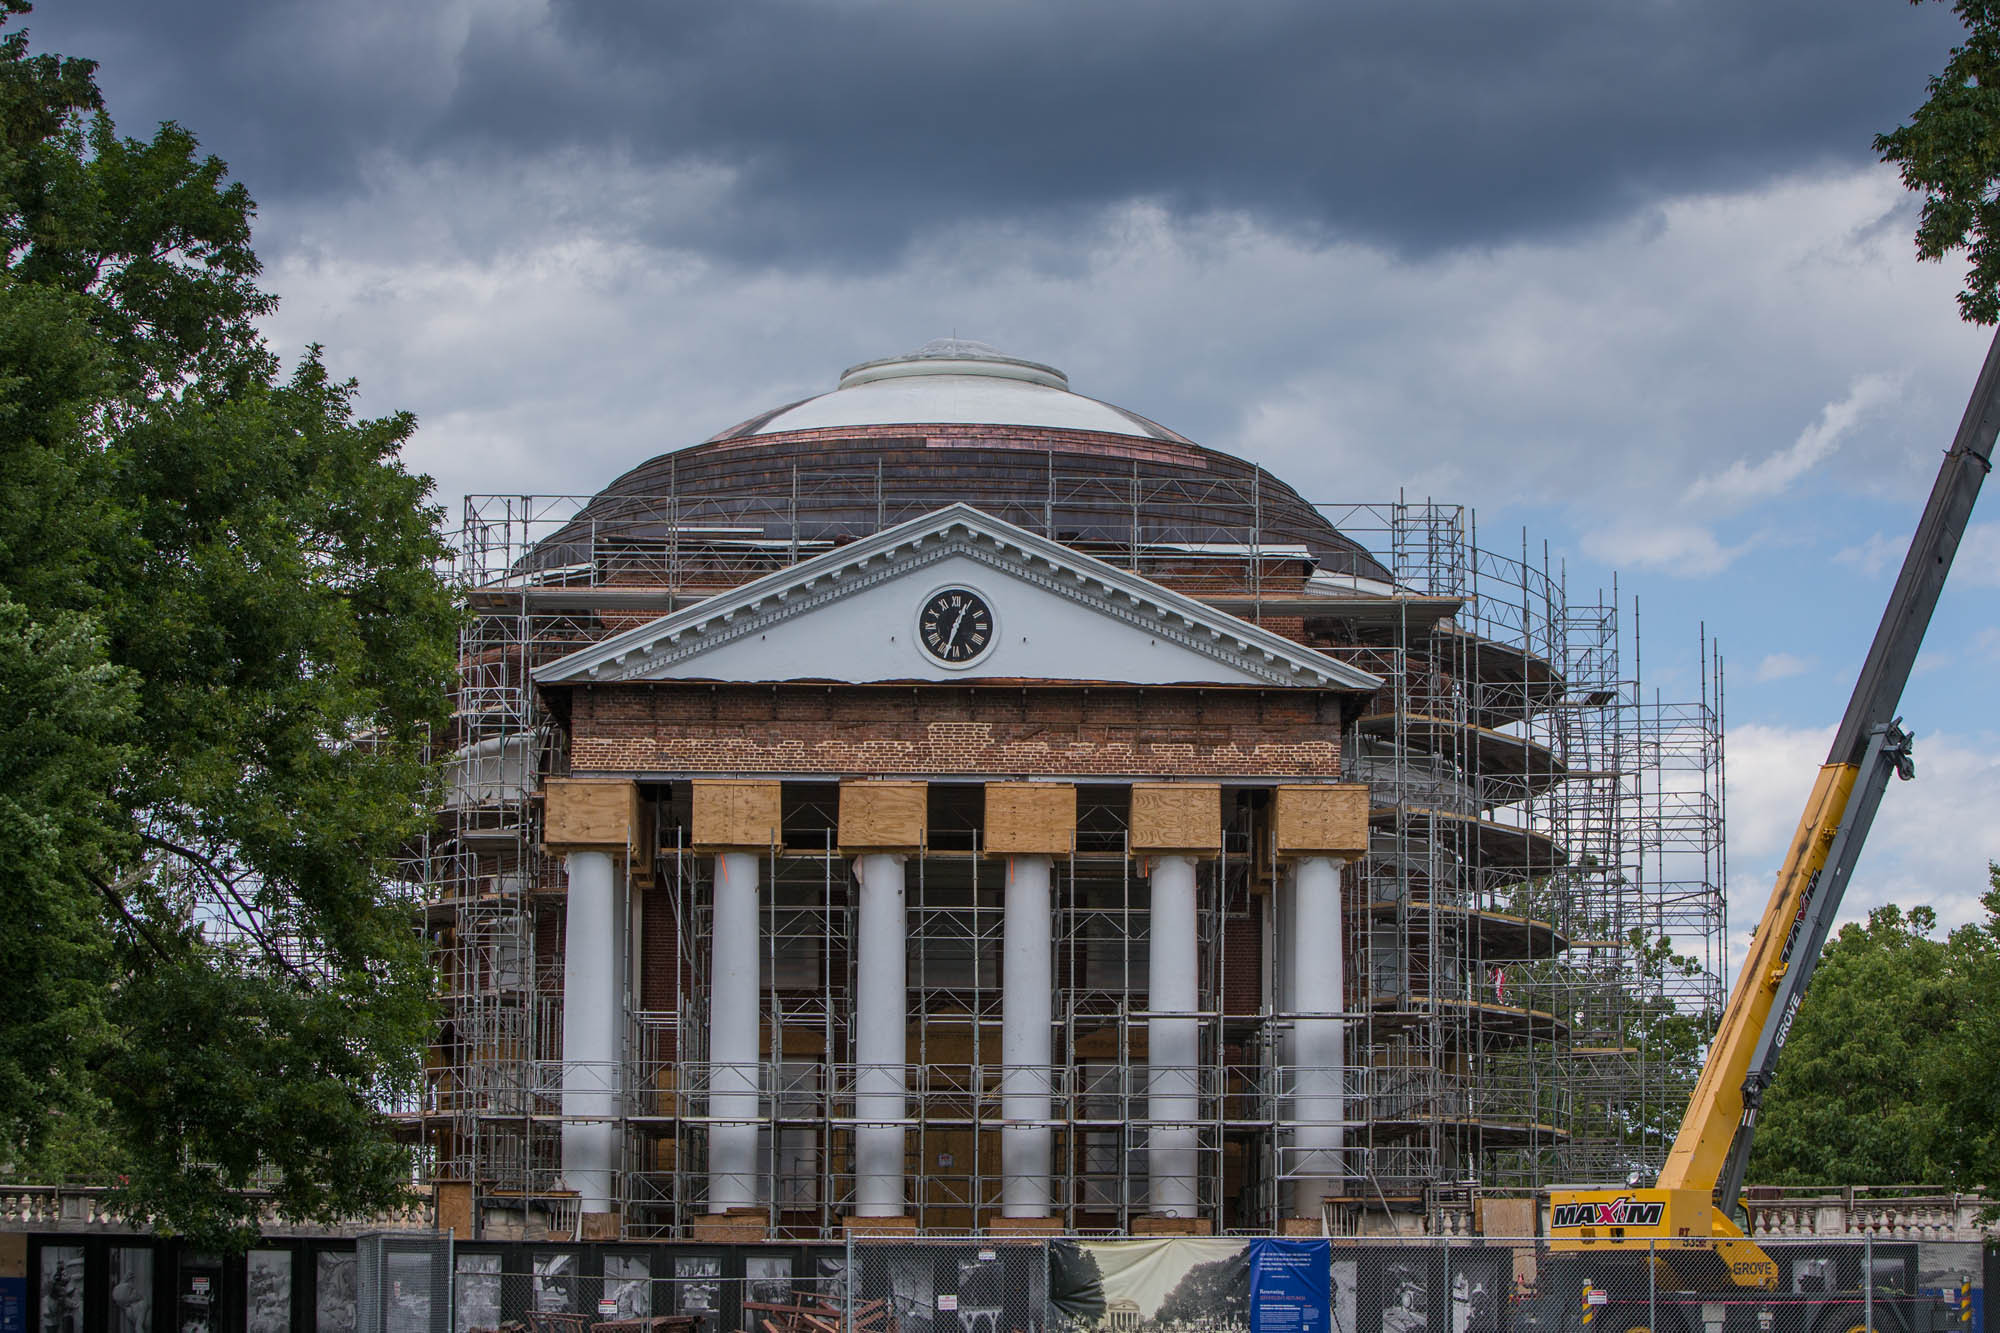 The Rotunda Surrounded by scaffolding